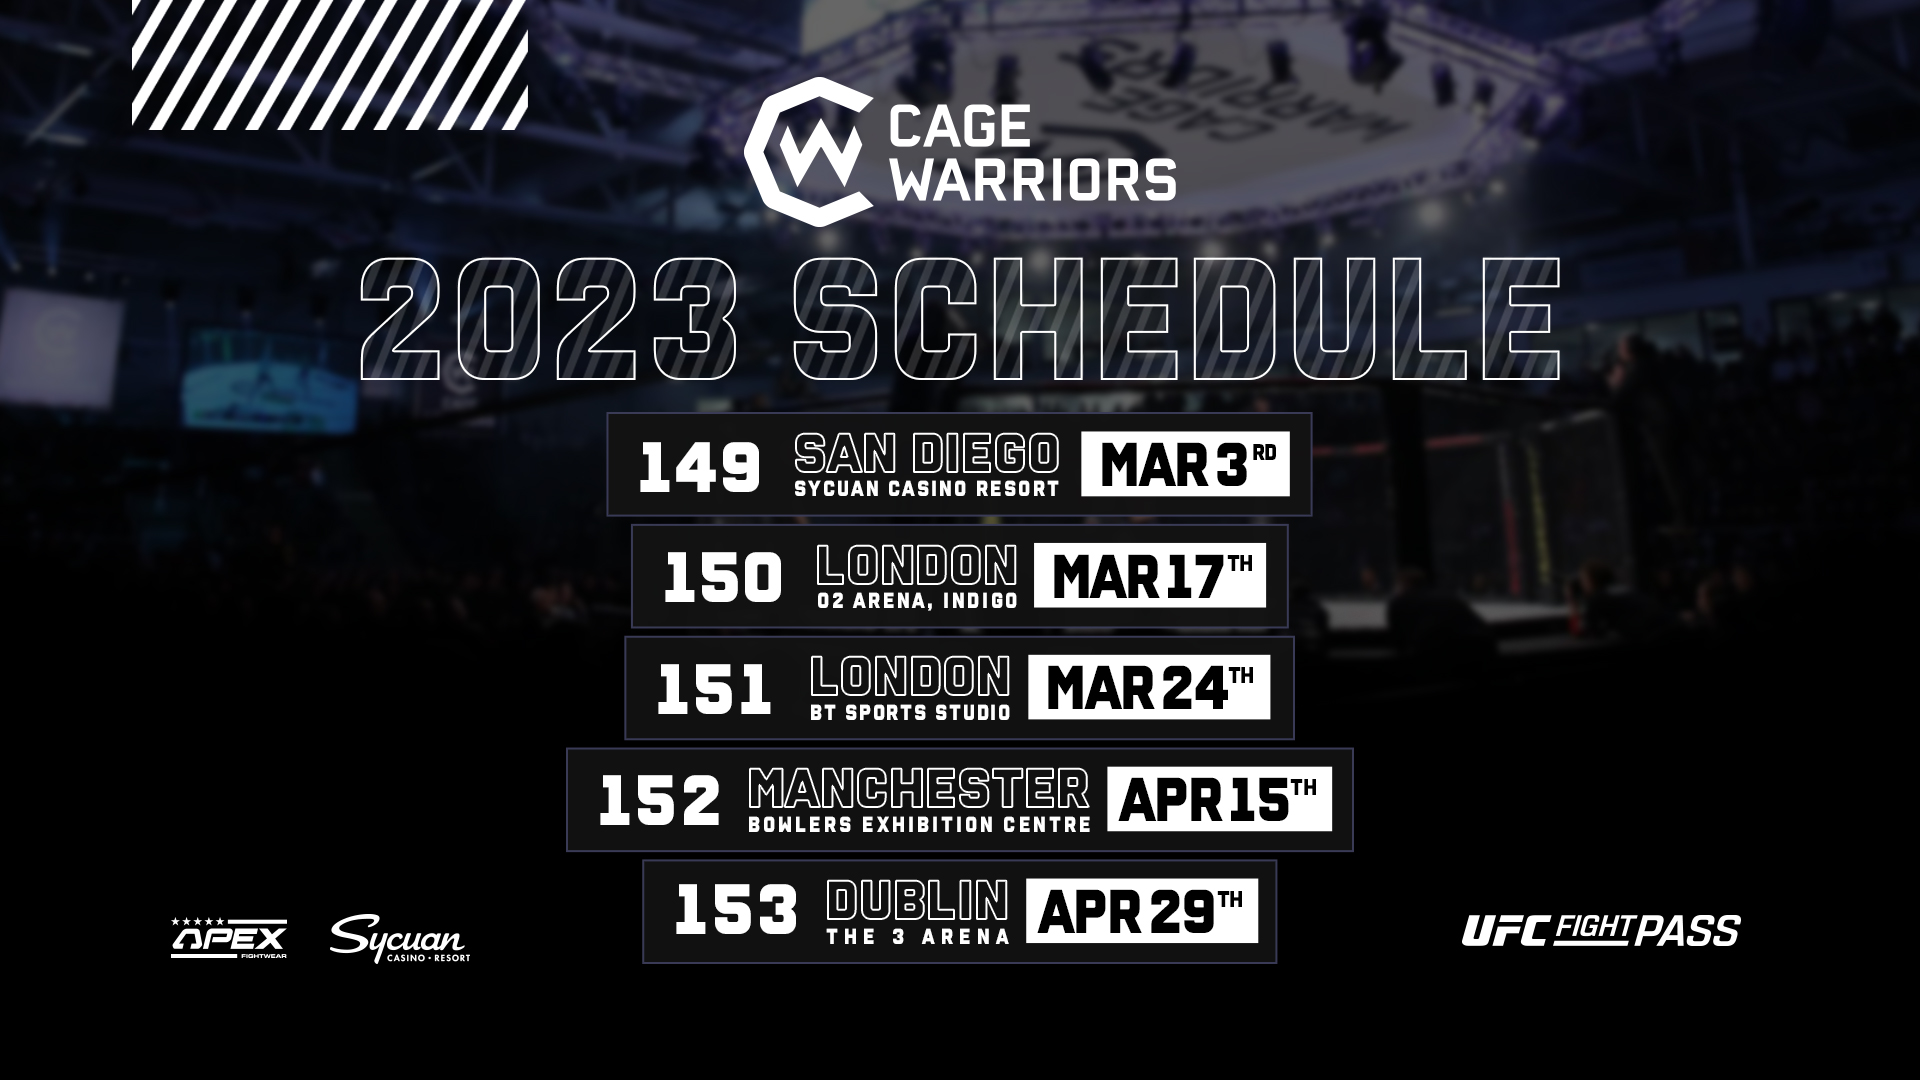 Cage Warriors announces five events to kick off 2023 schedule